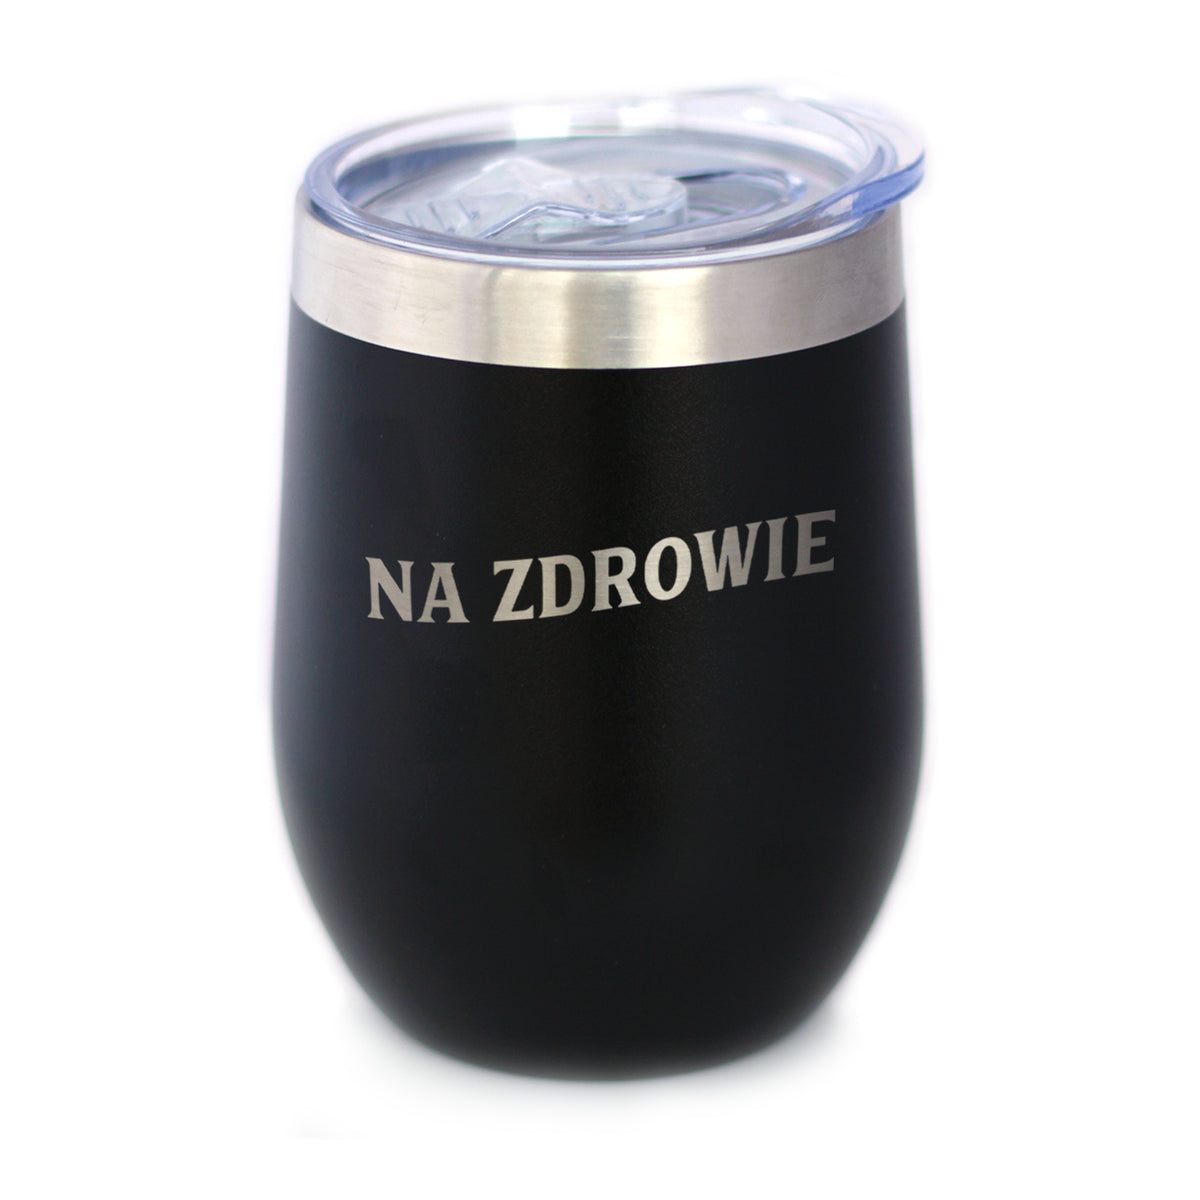 Na Zdrowie - Polish Cheers - Wine Tumbler Glass with Sliding Lid - Stainless Steel Insulated Mug - Cute Poland Themed Gifts or Party Decor for Women and Men